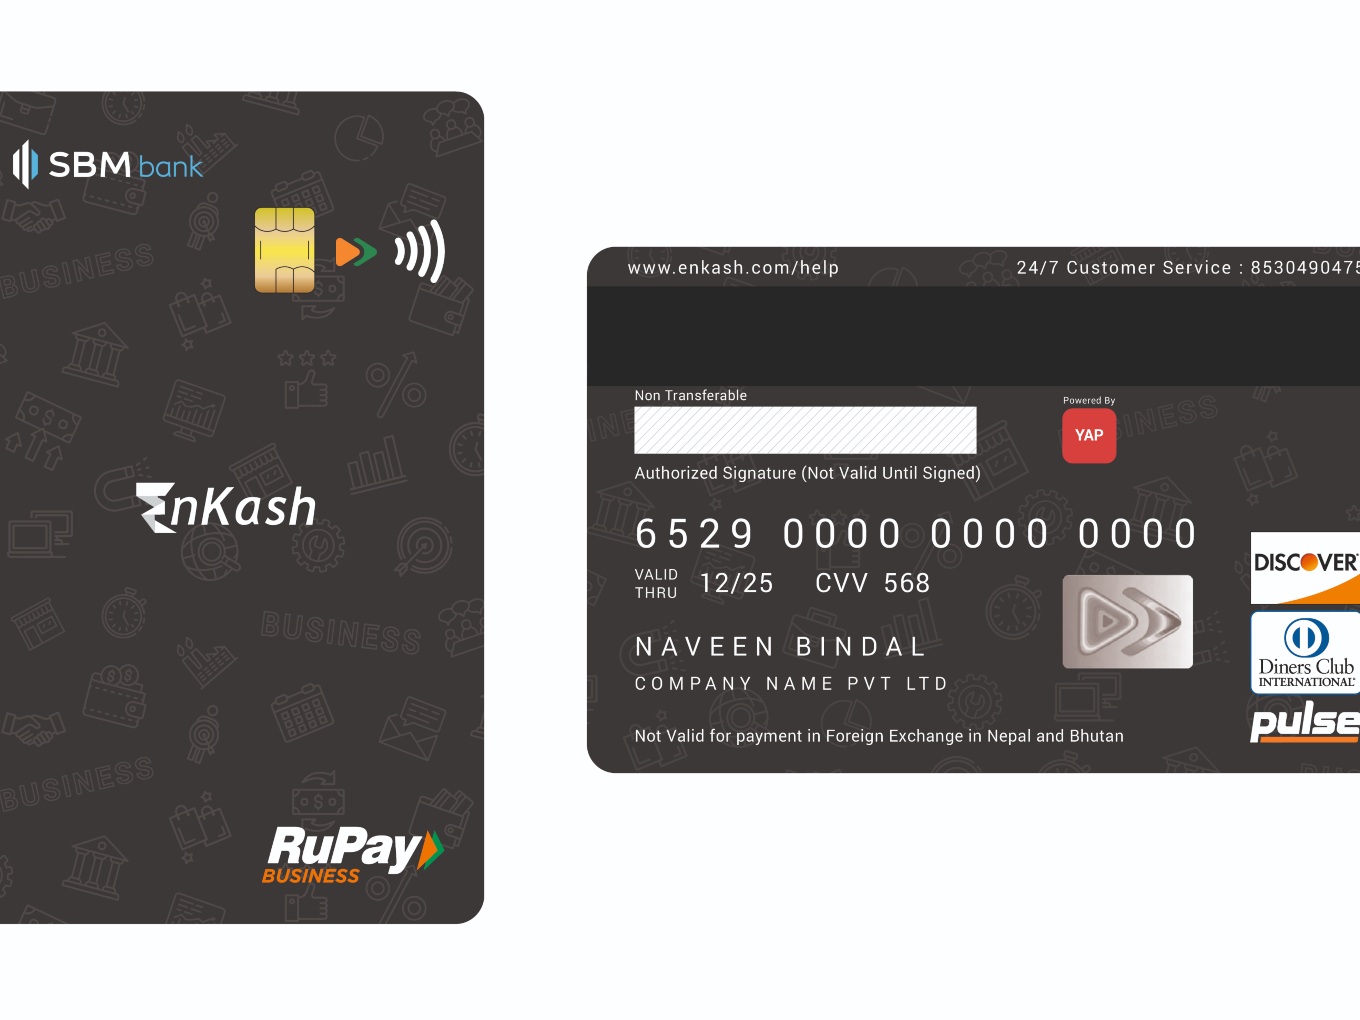 NPCI Launches RuPay Credit Card For Small Businesses, Startups